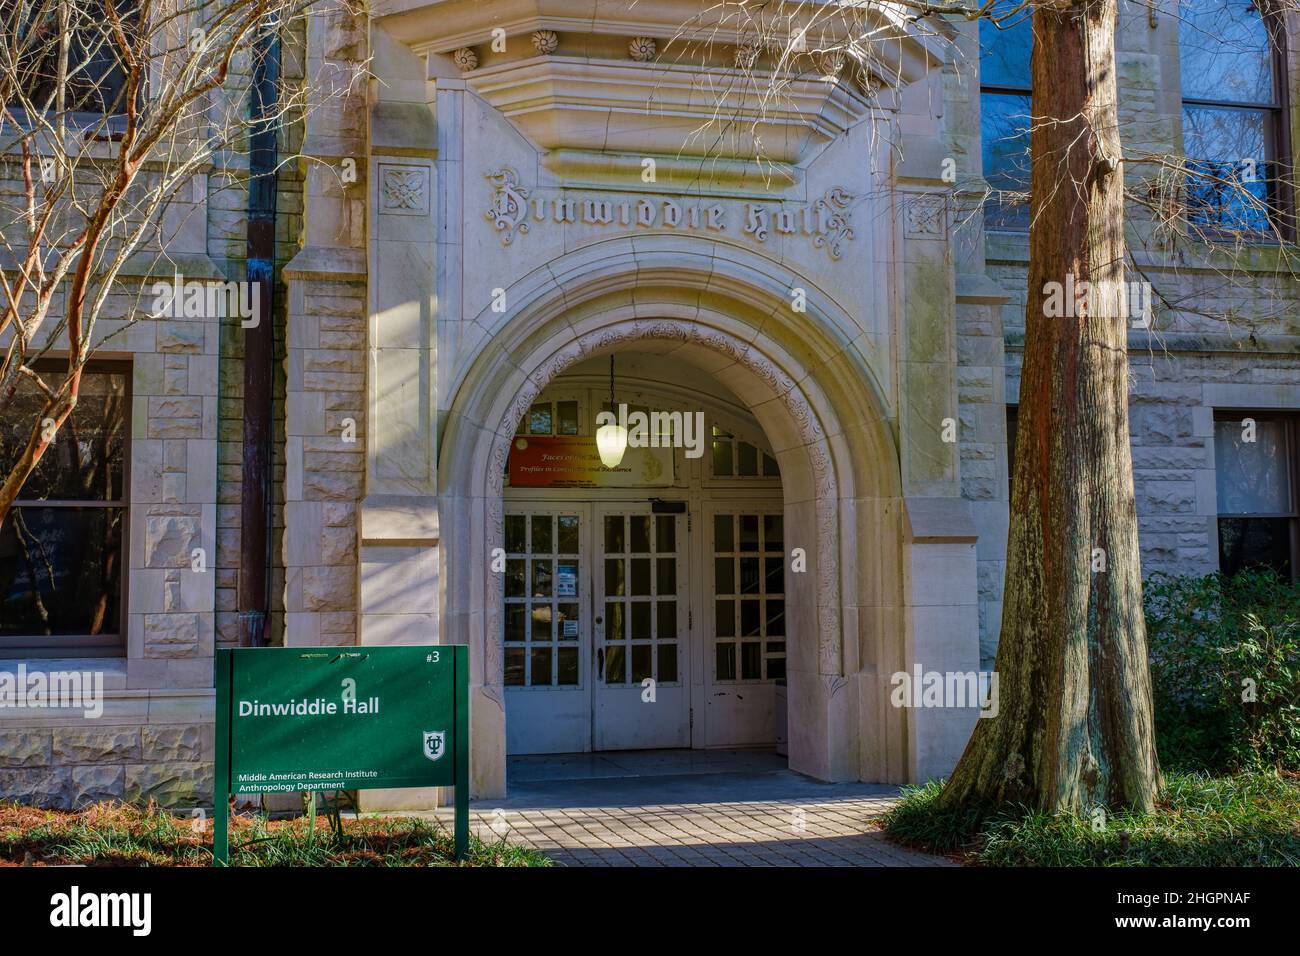 NEW ORLEANS, LA, USA - JANUARY 18, 2022: Entrance to Dinwiddie Hall on Tulane University campus Stock Photo